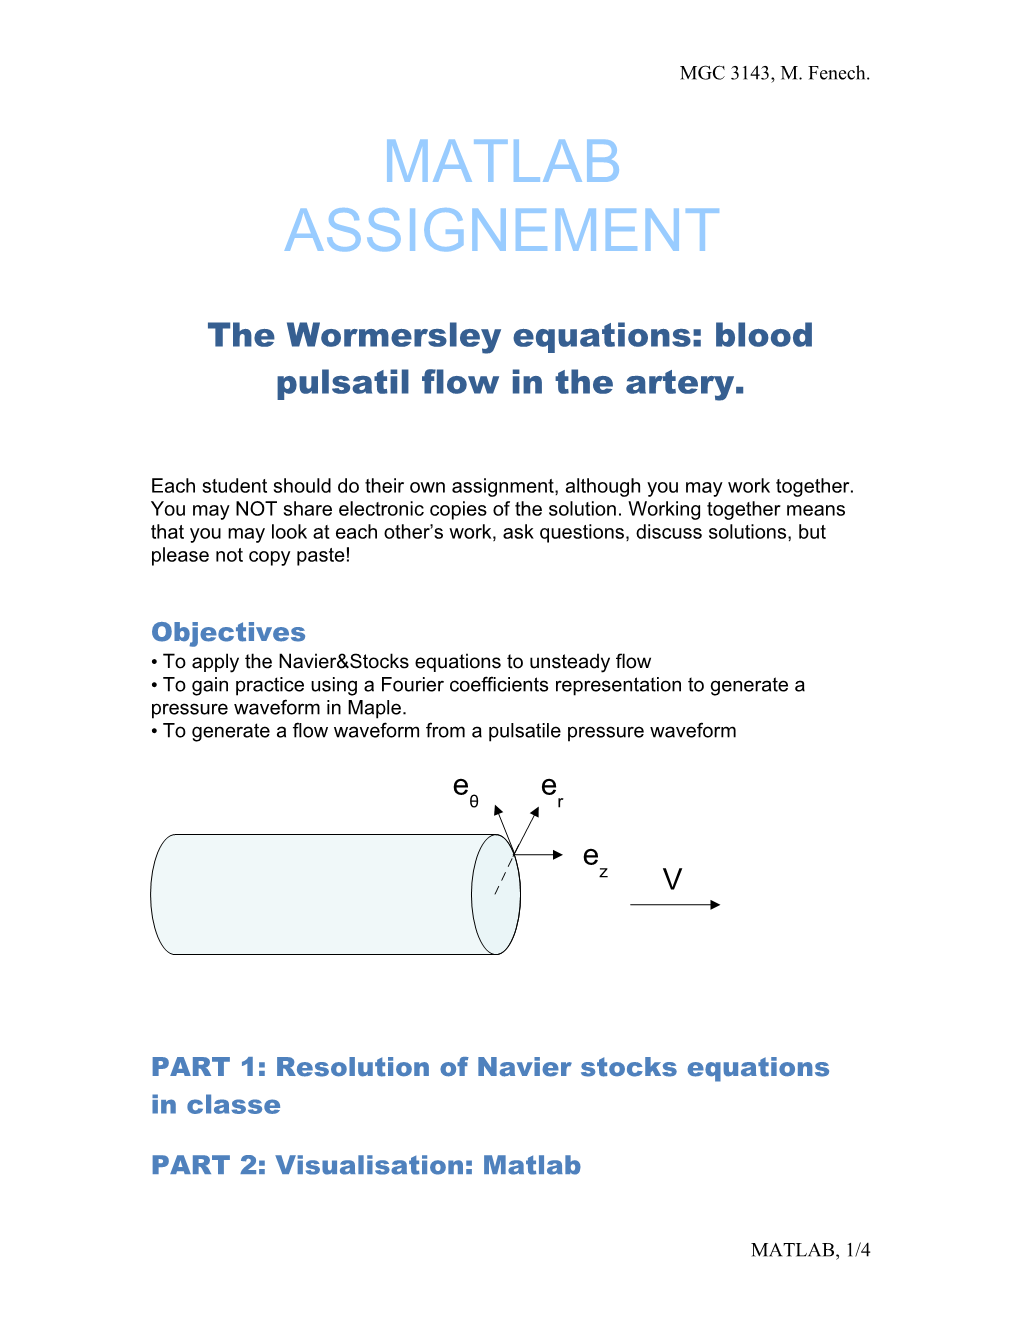 The Wormersley Equations: Blood Pulsatil Flow in the Artery